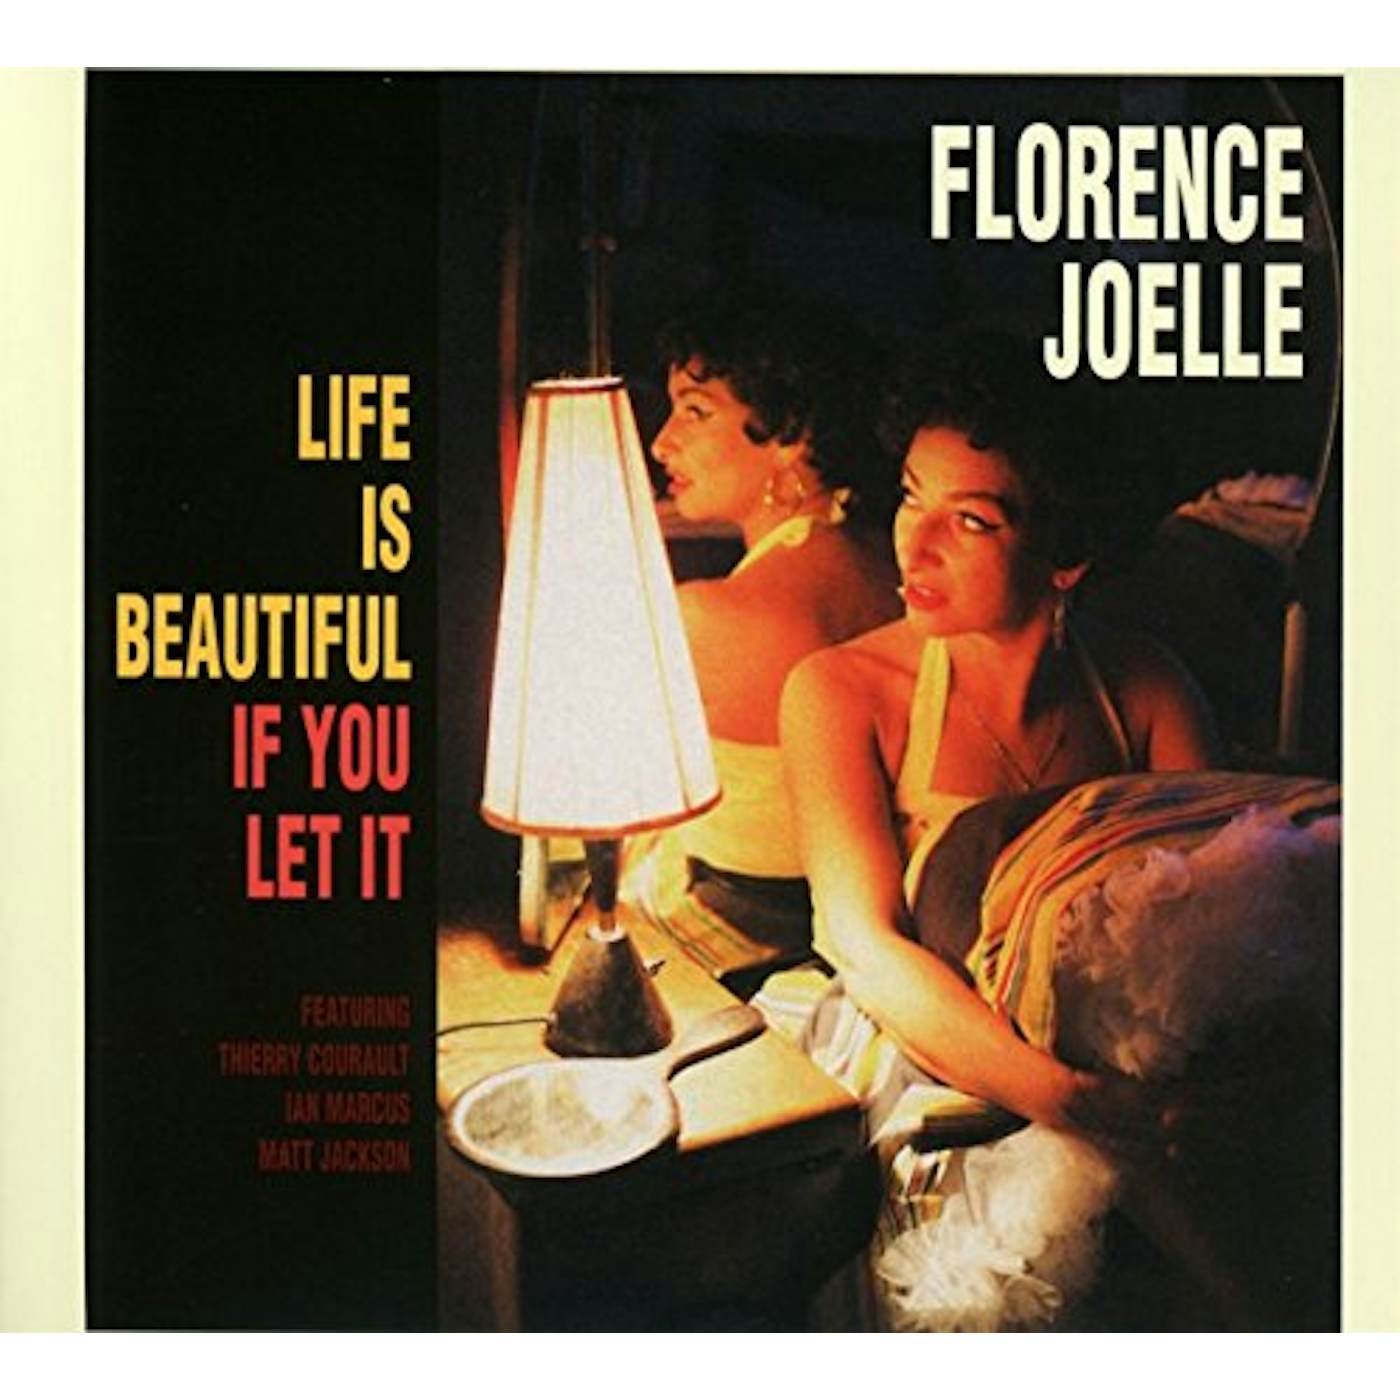 Florence Joelle LIFE IS BEAUTIFUL IF YOU LET IT CD